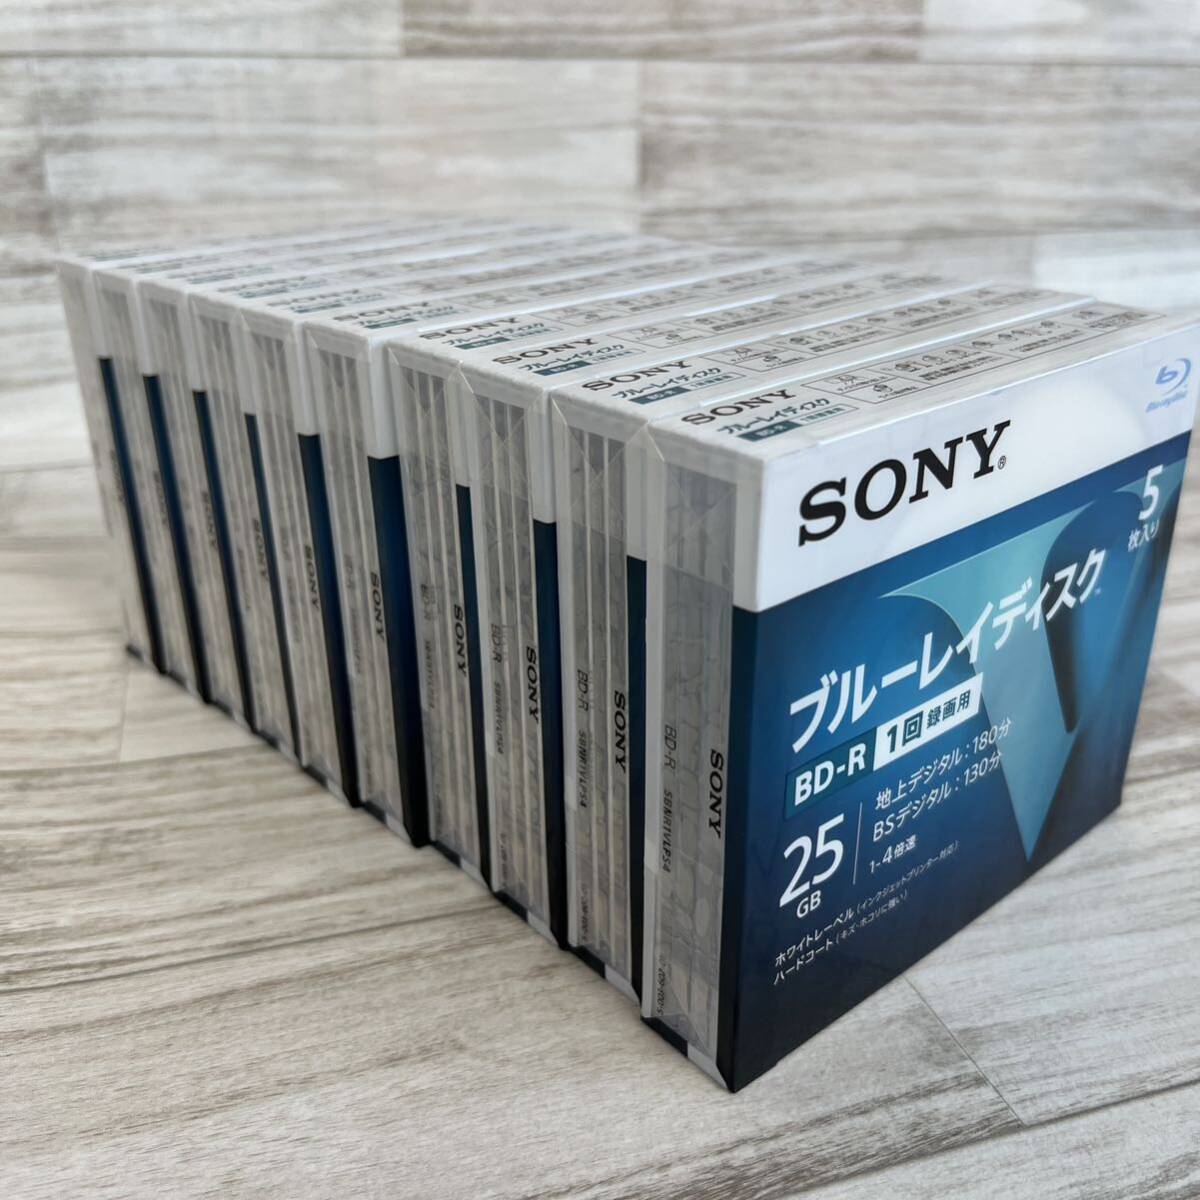  Sony Blue-ray disk BD-R(1 times video recording for ) 25GB 5 sheets entering 5BNR1VLPS4 10 piece set sale 